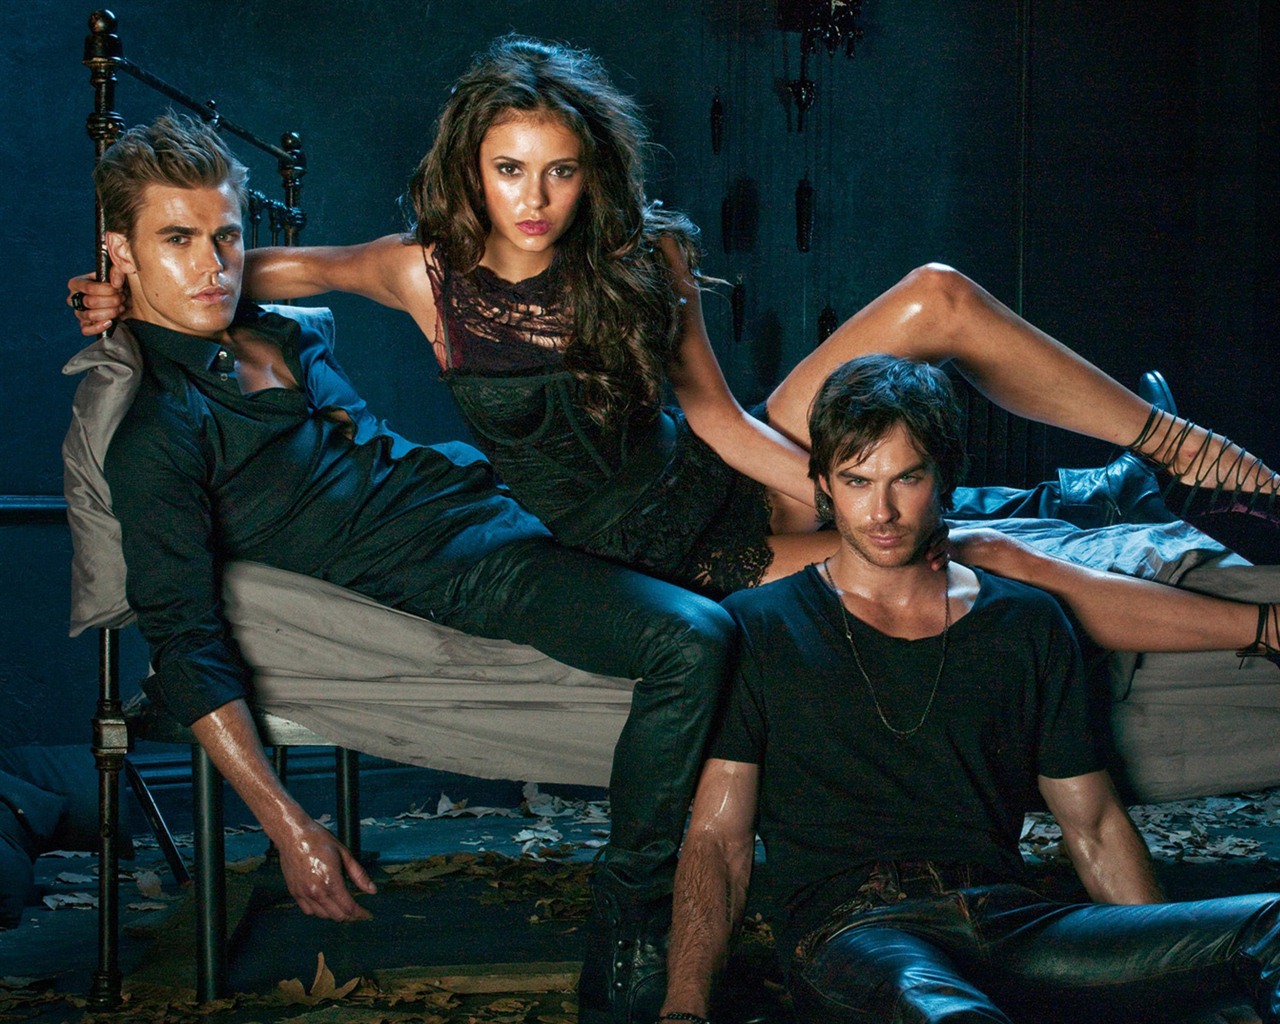 The Vampire Diaries wallpapers HD #20 - 1280x1024